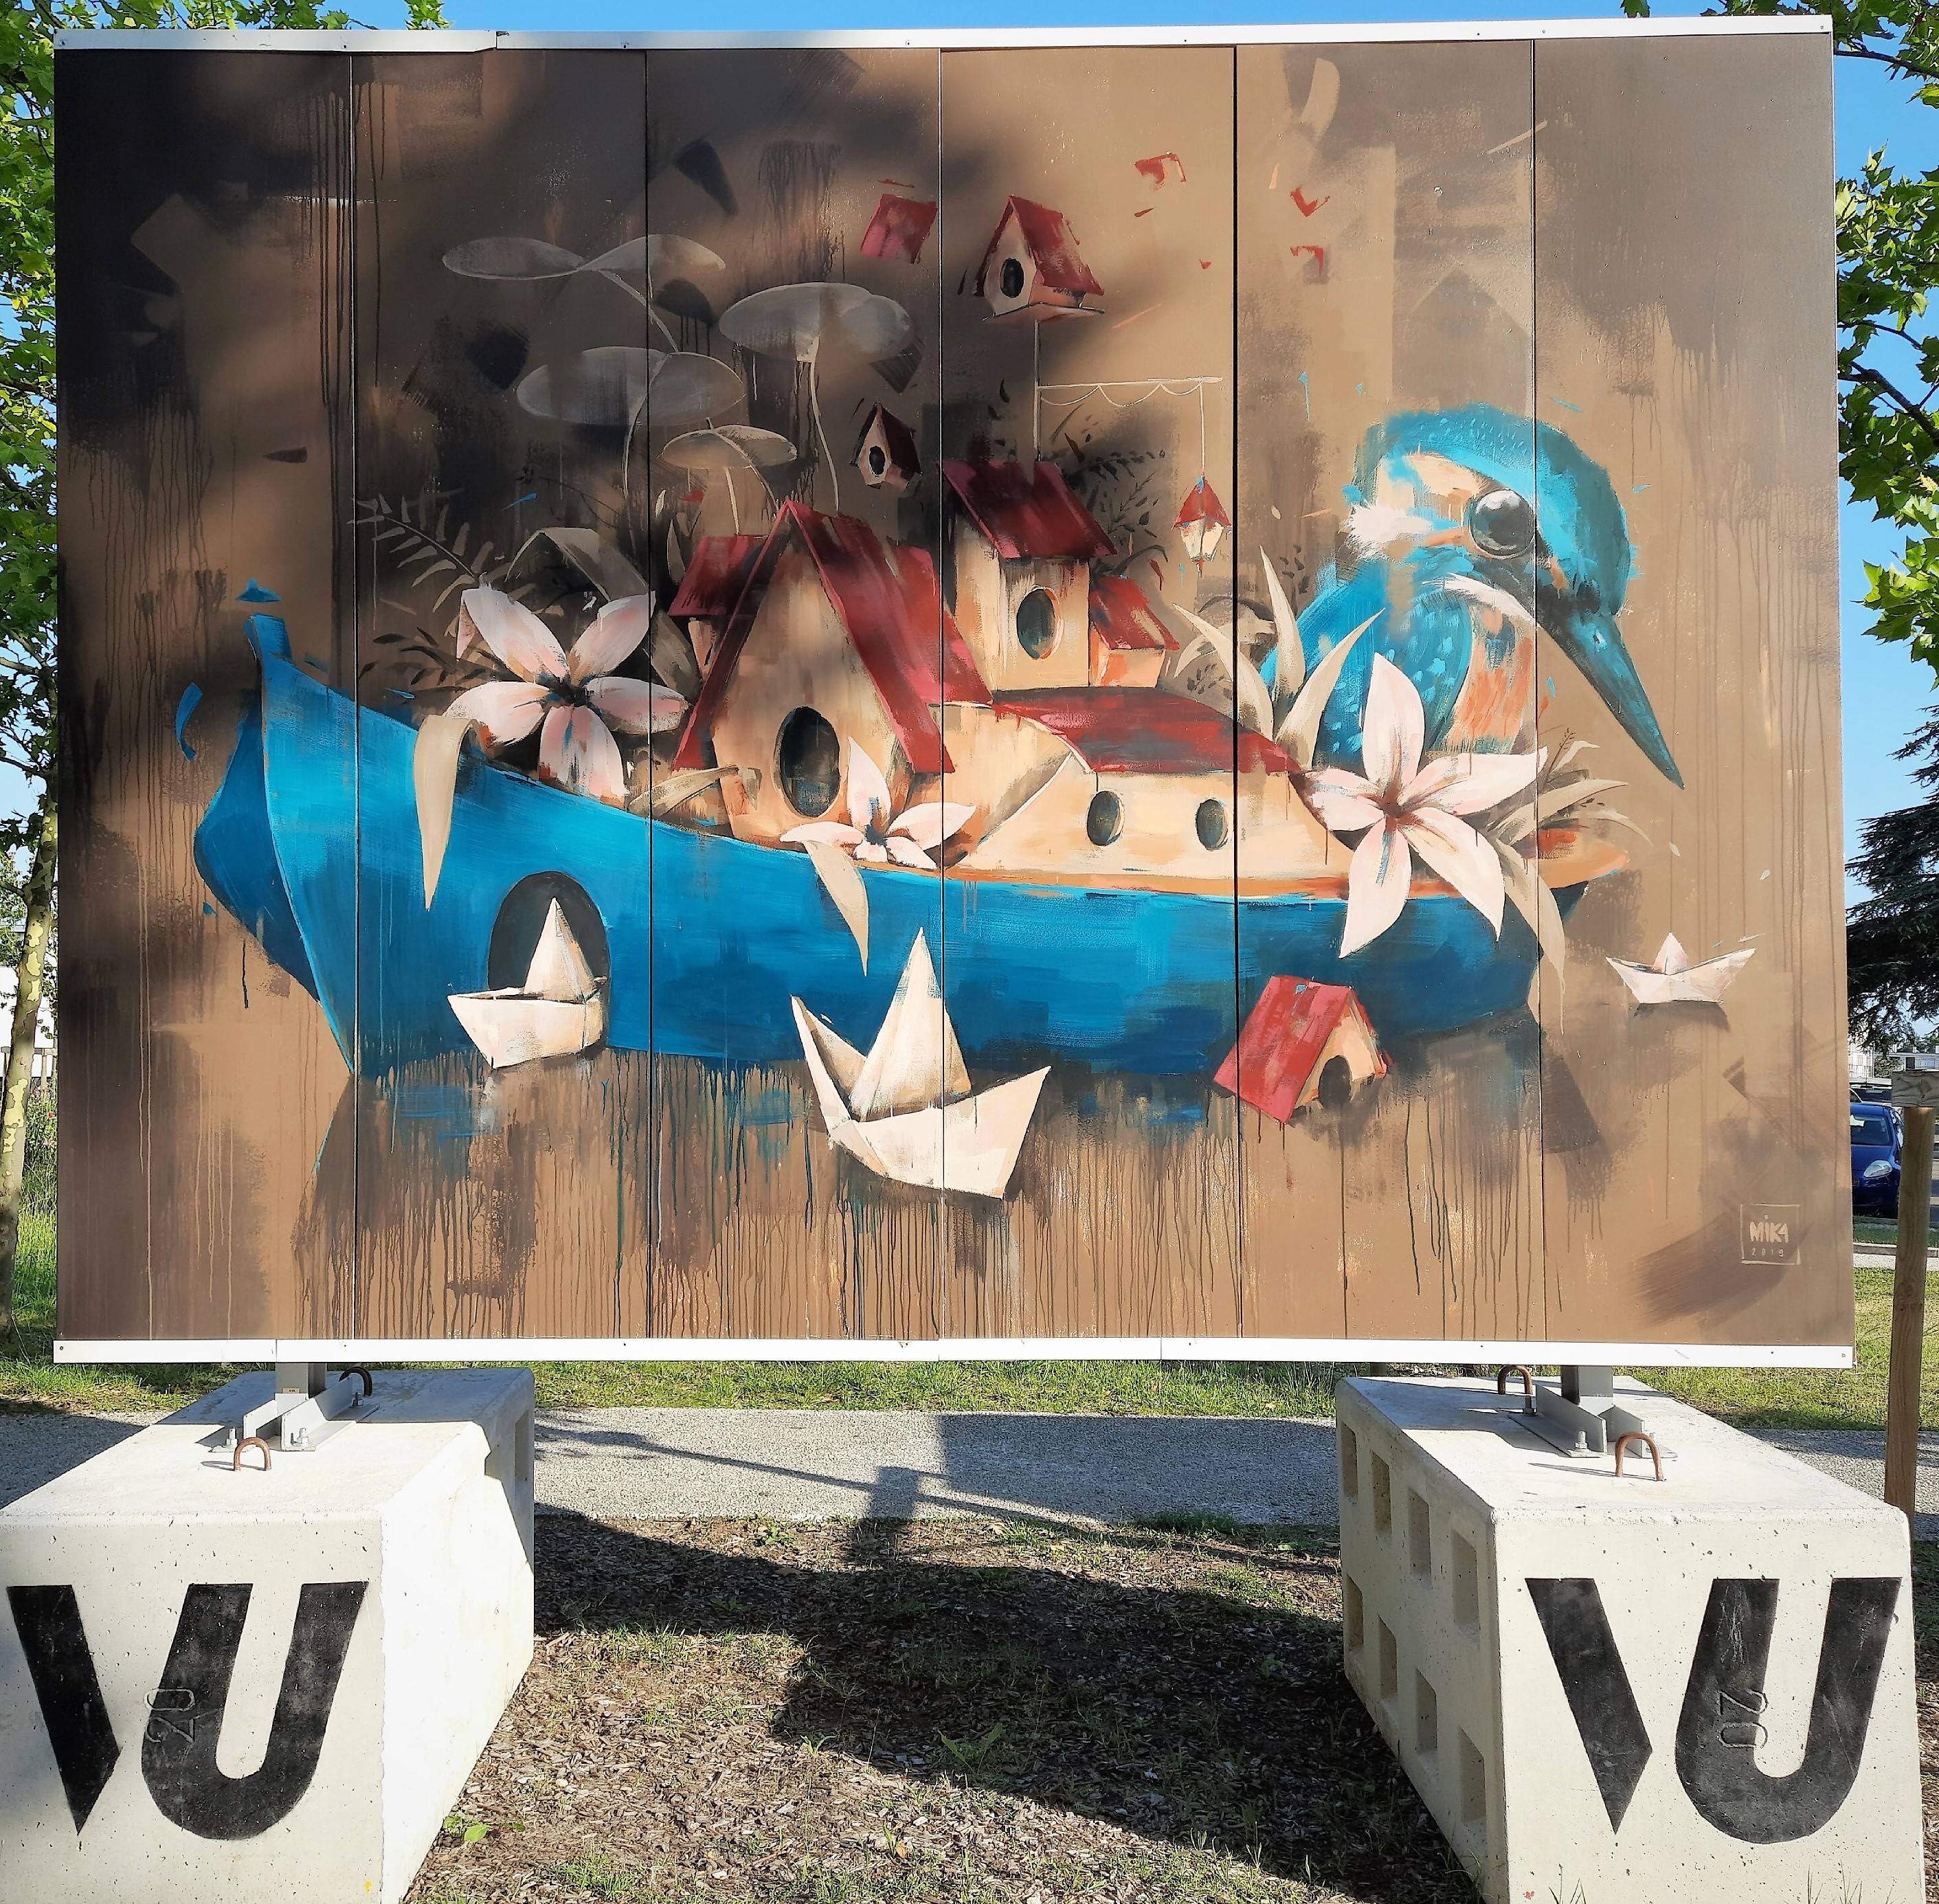 Graffiti 6883  by the artist Mika captured by Mephisroth in Pessac France